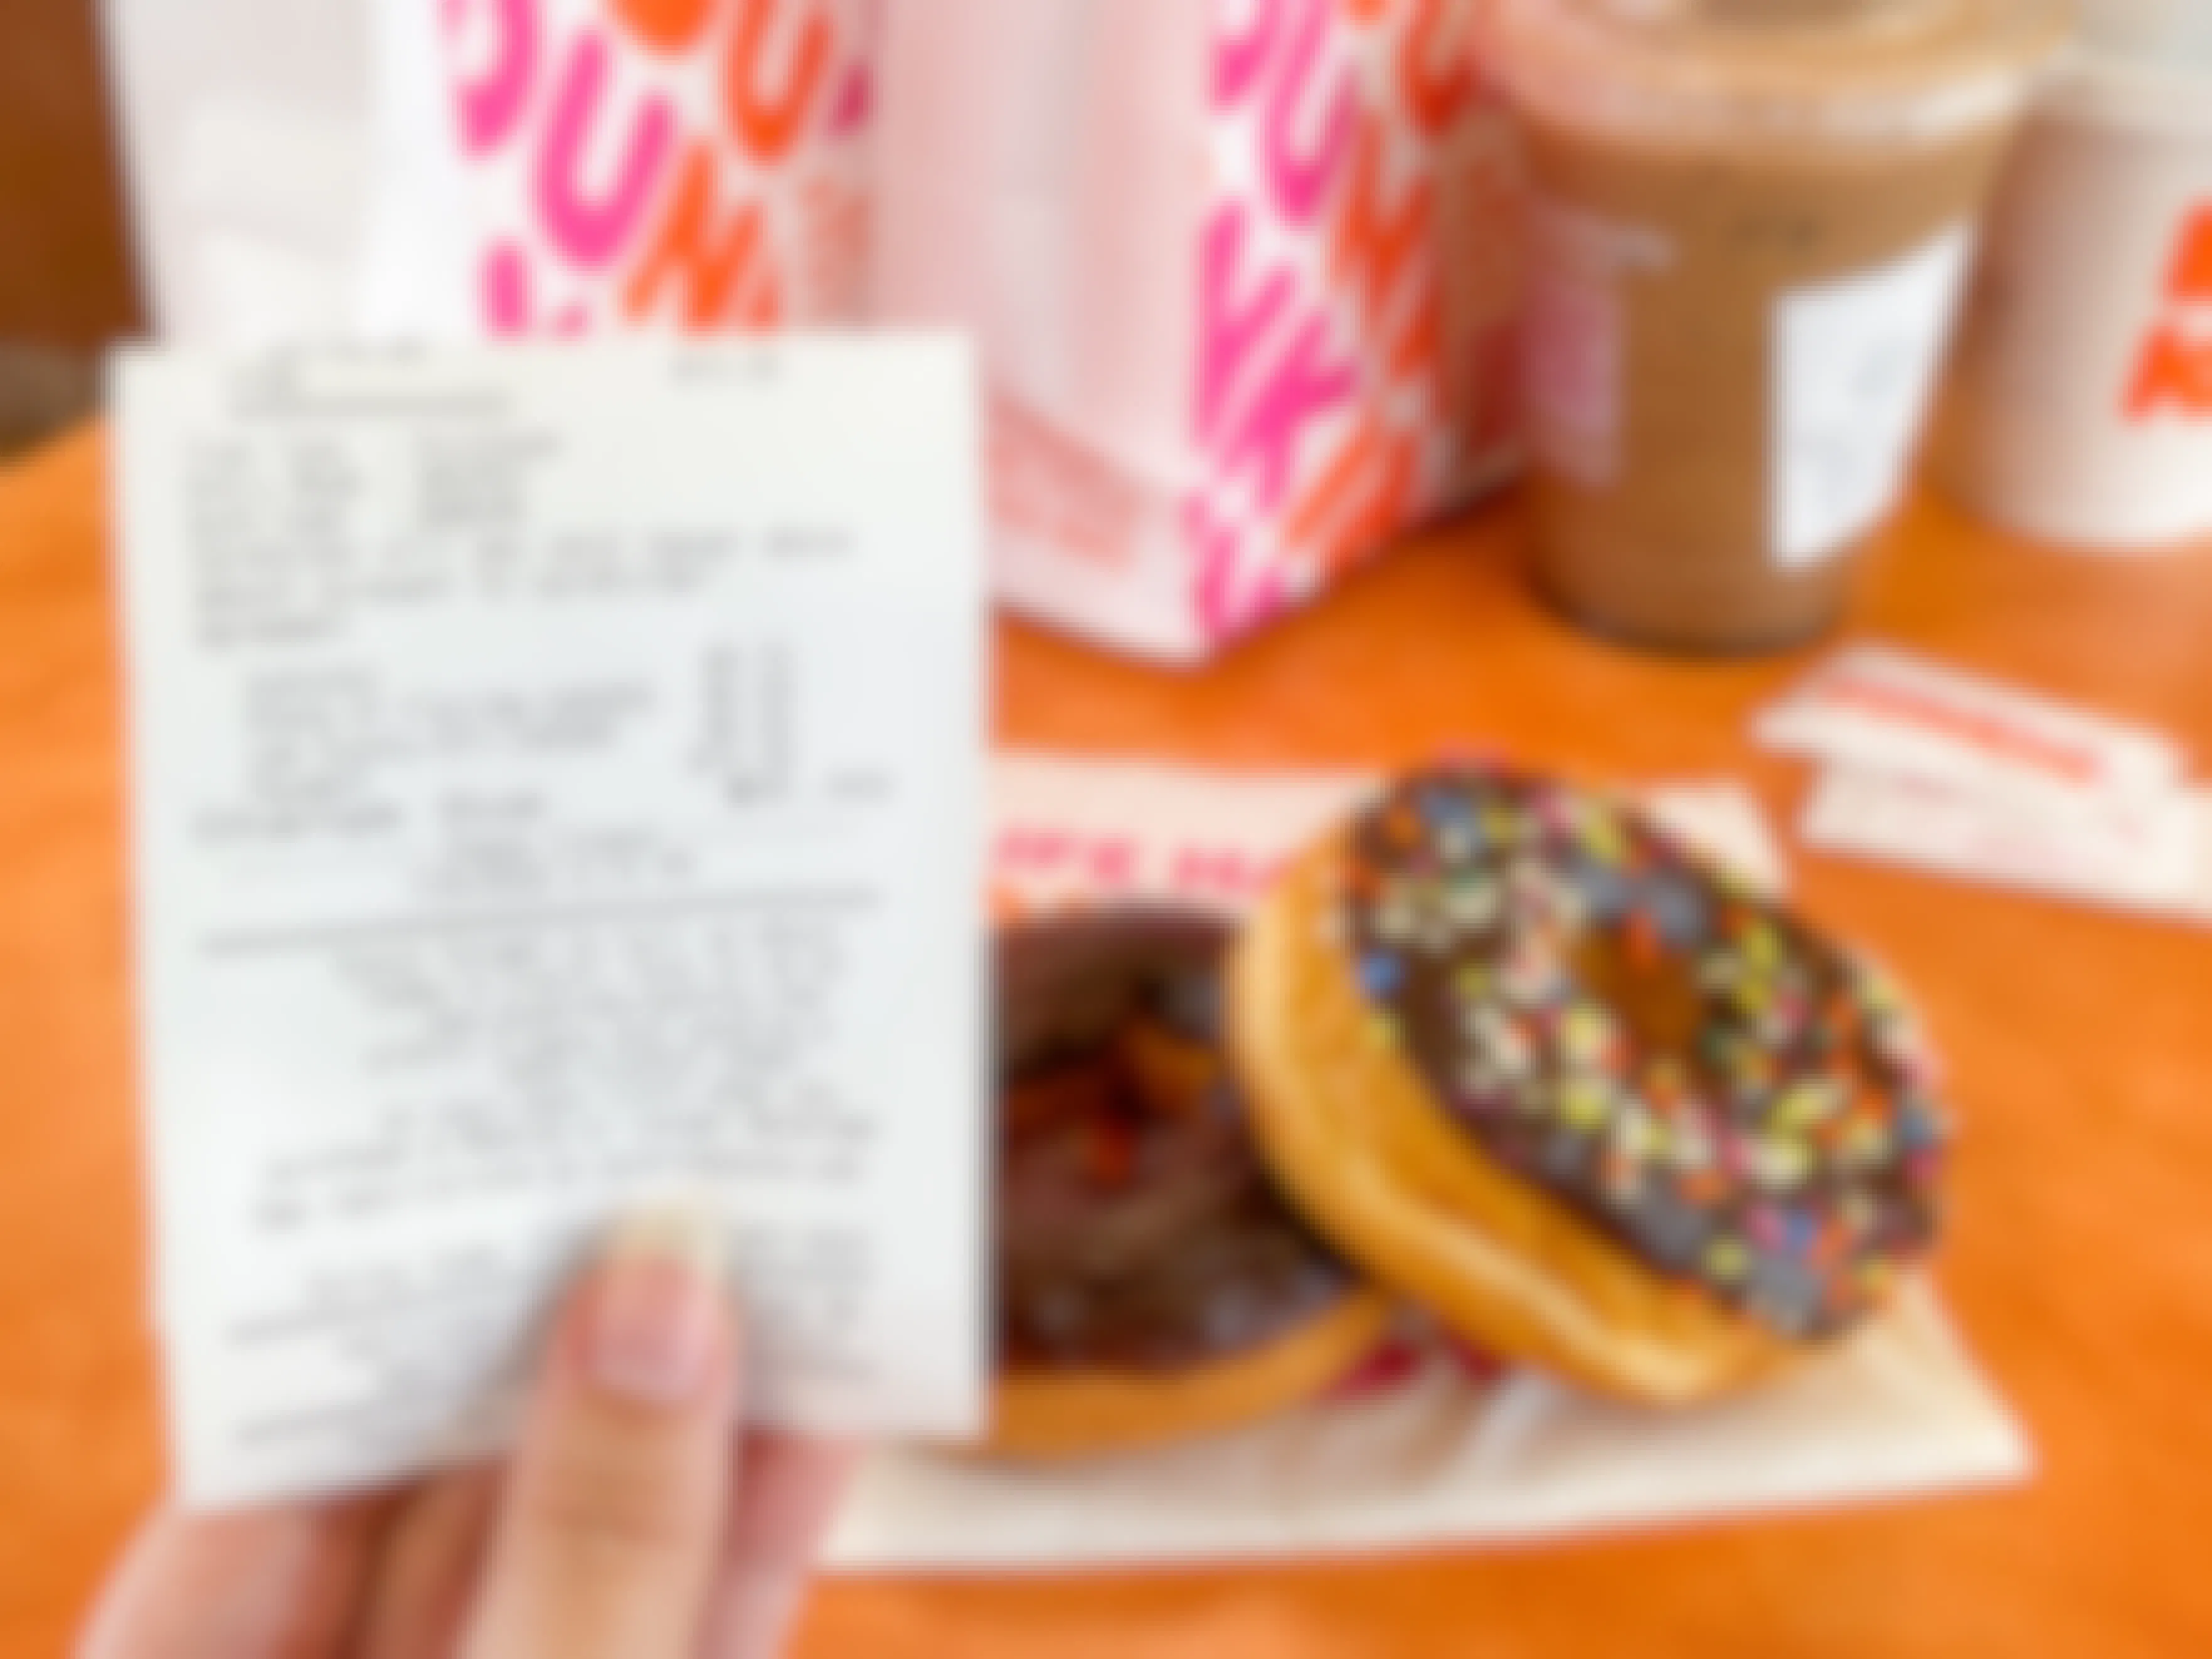 A person's hand holding a receipt offering a free donut for taking the survey printed on the bottom with some donuts, two coffees, some sugar packets, and Dunkin bags on the table in the background.